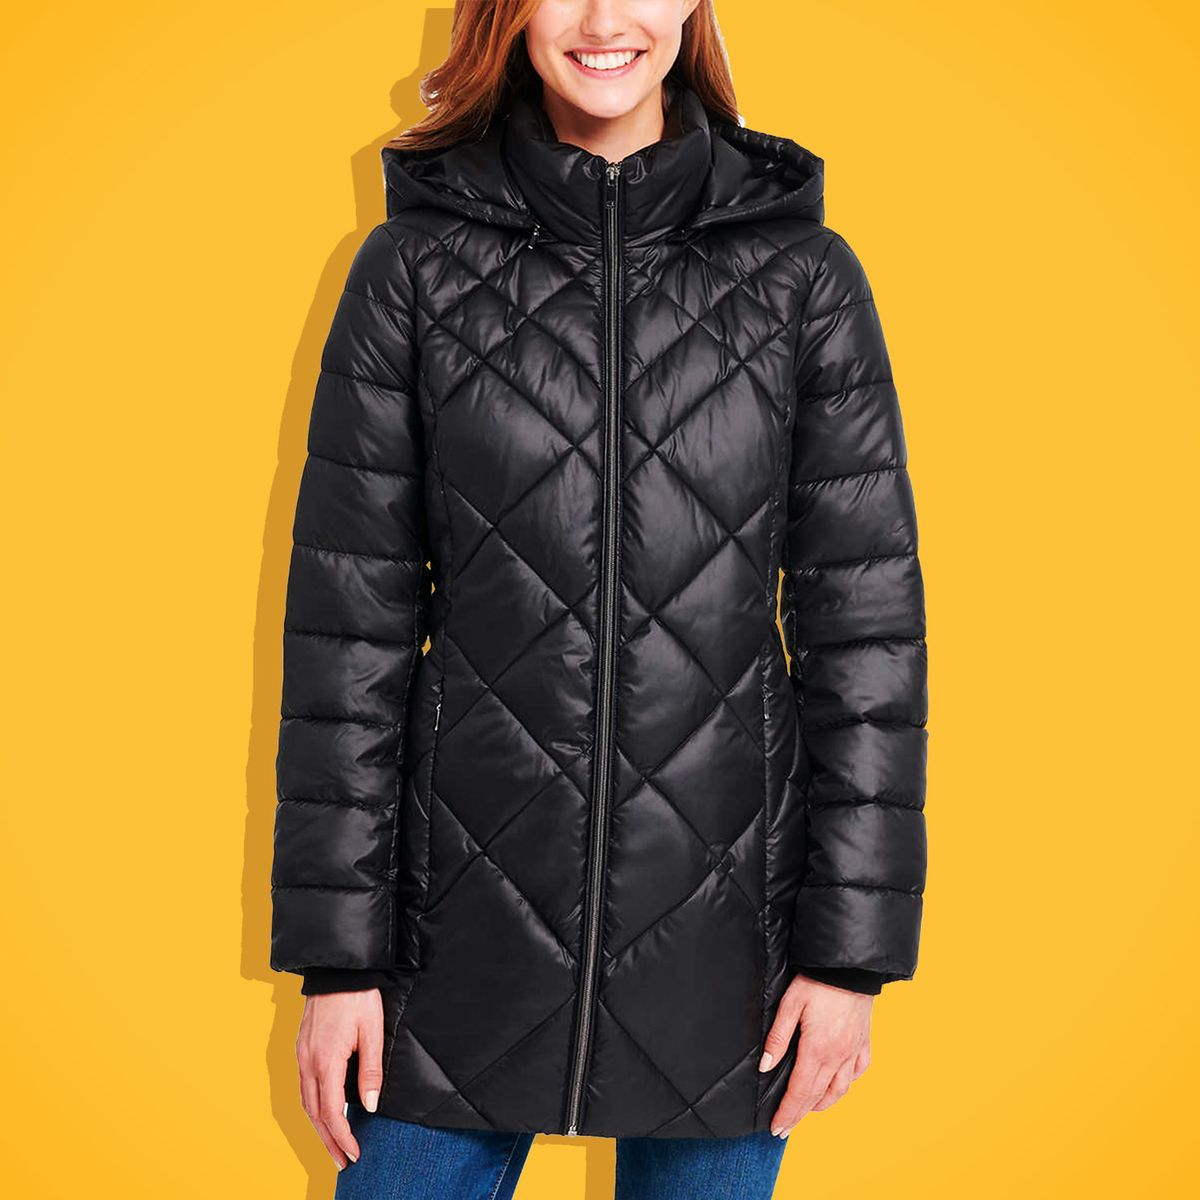 Costco Andrew Marc Packable Down Coat Review 2019 | The Strategist